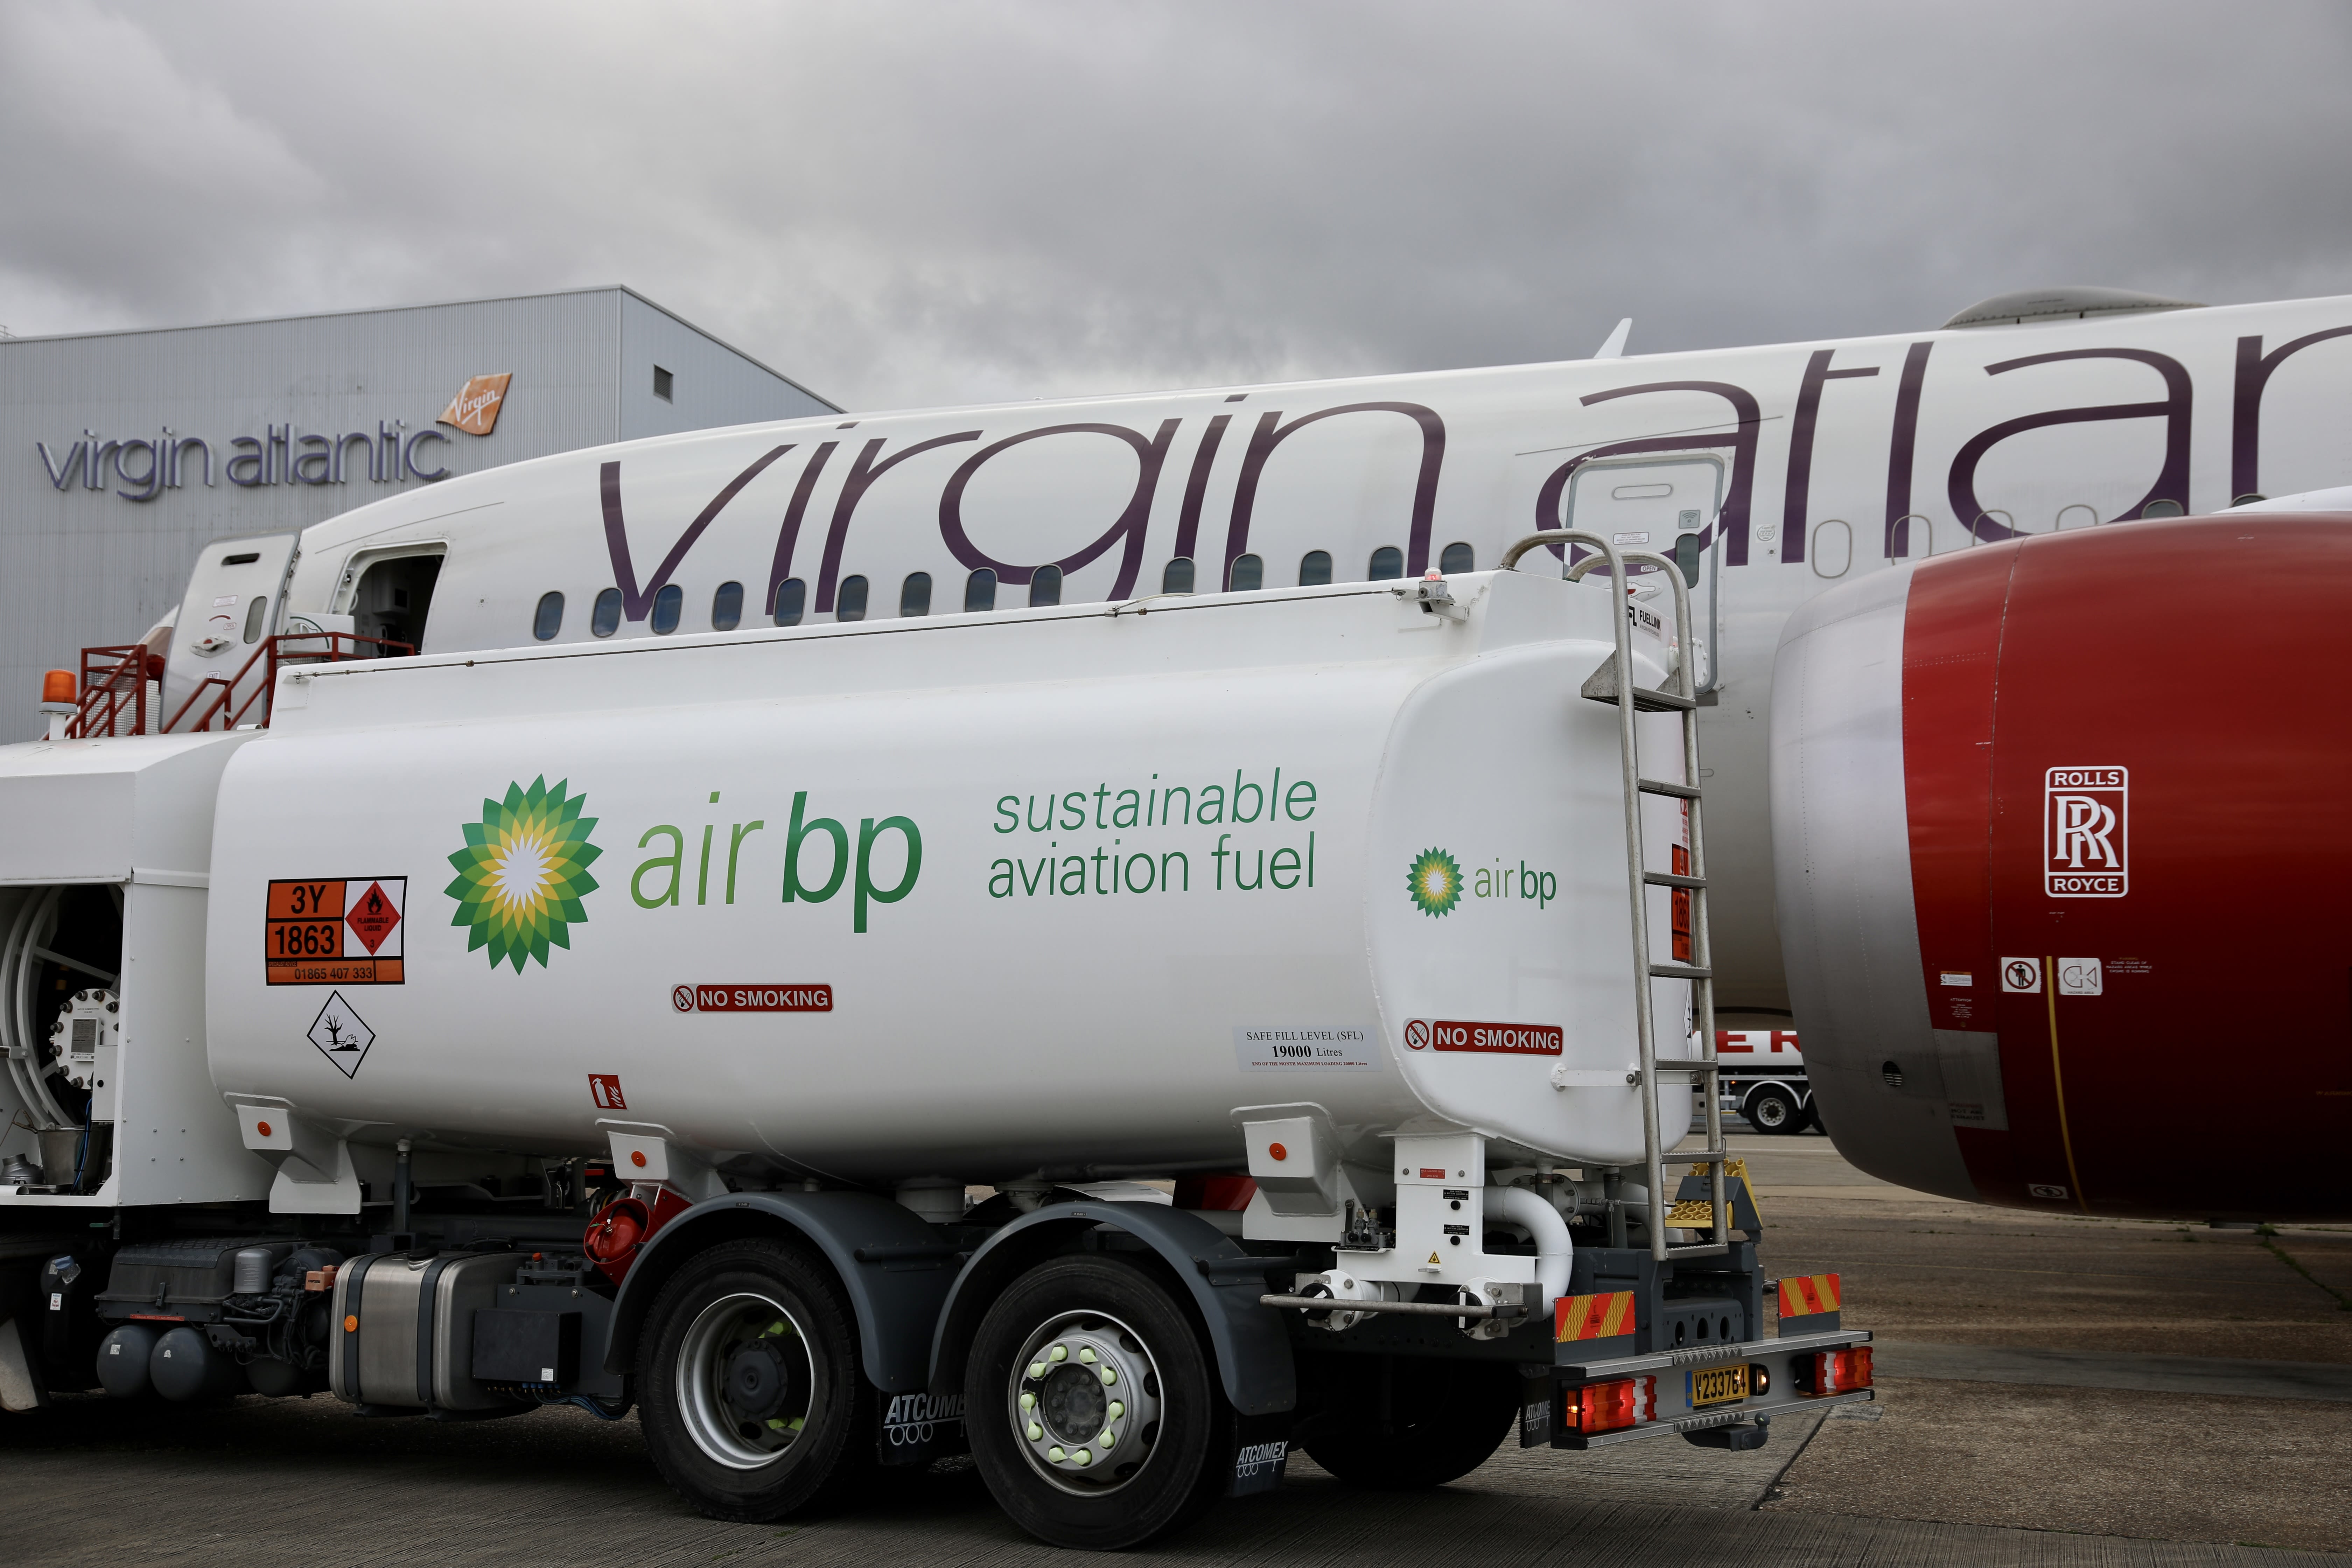 An Air BP Sustainable Aviation Fuel tanker next to a Virgin Atlantic Boeing 787 aircraft